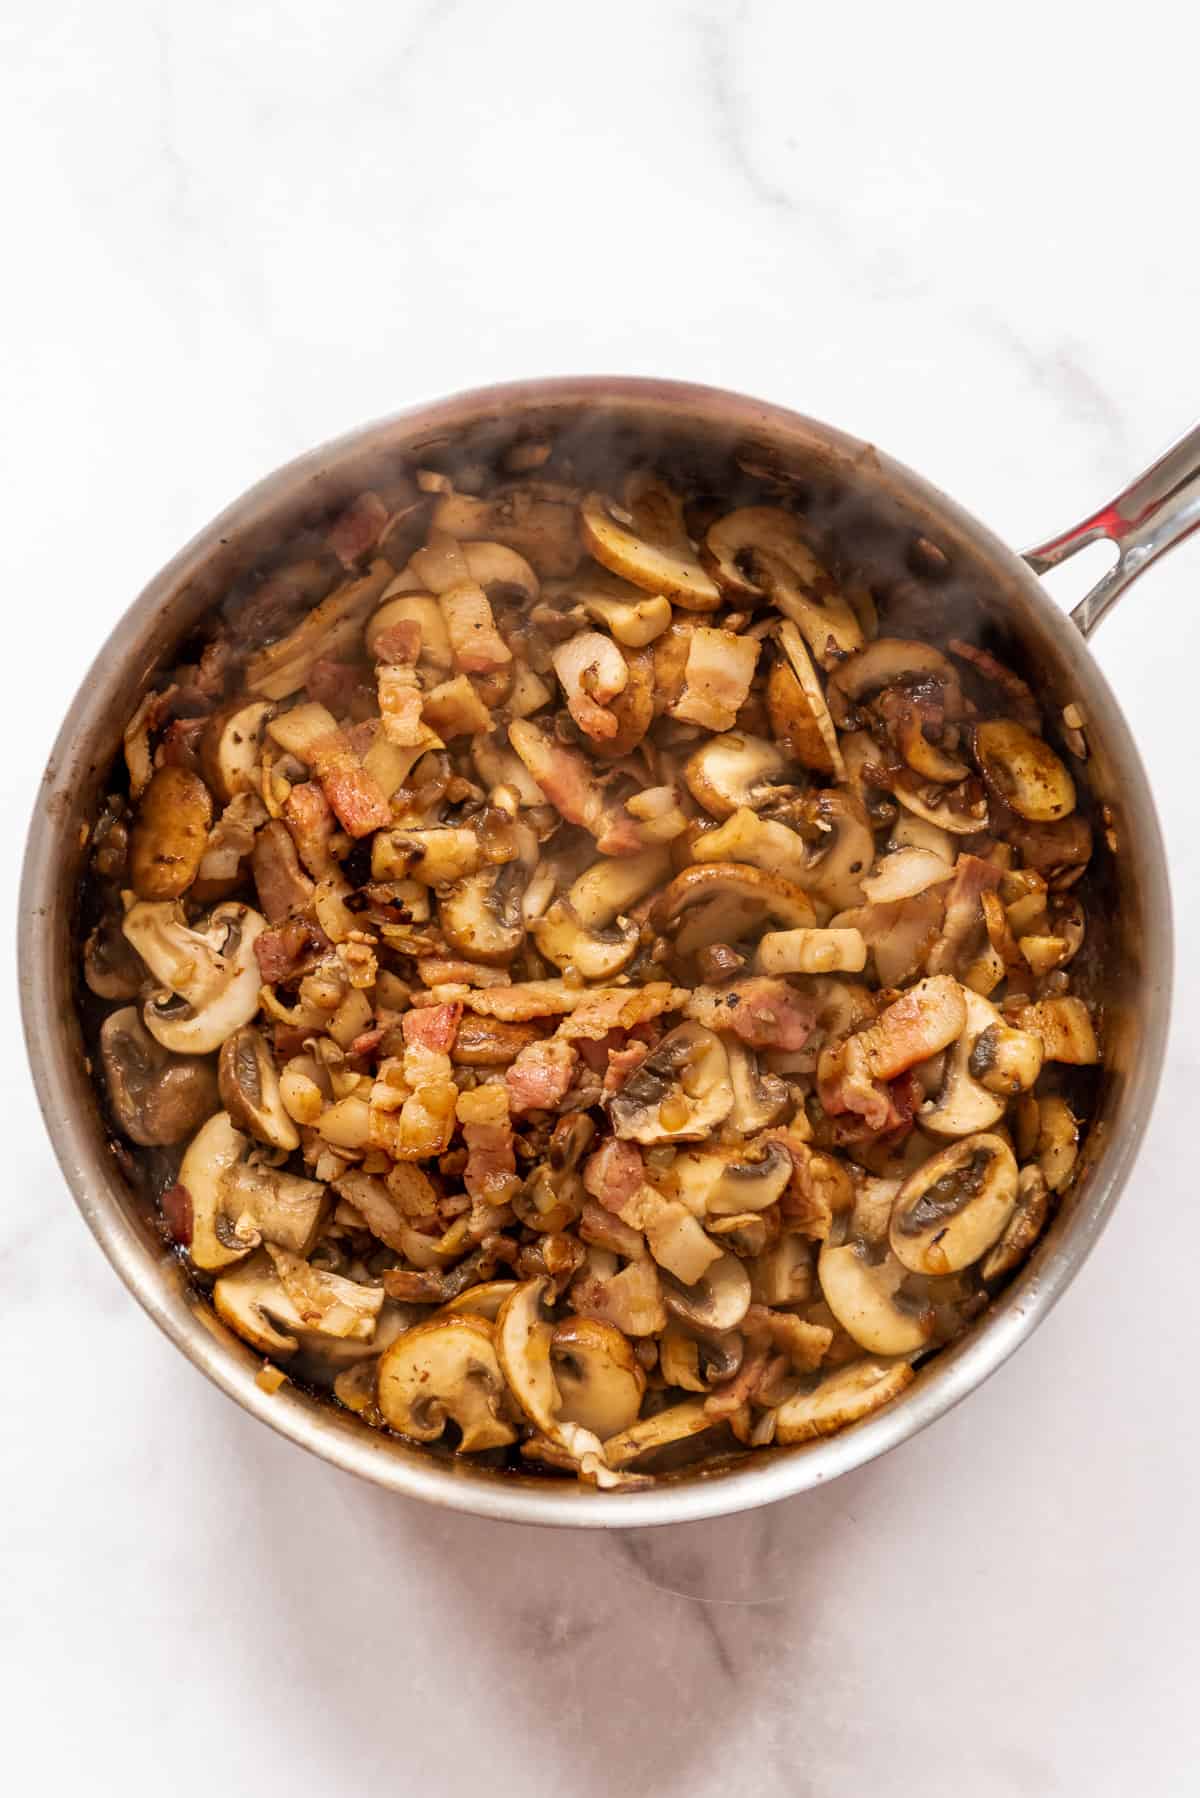 Sauteed mushrooms and onions in a pan.